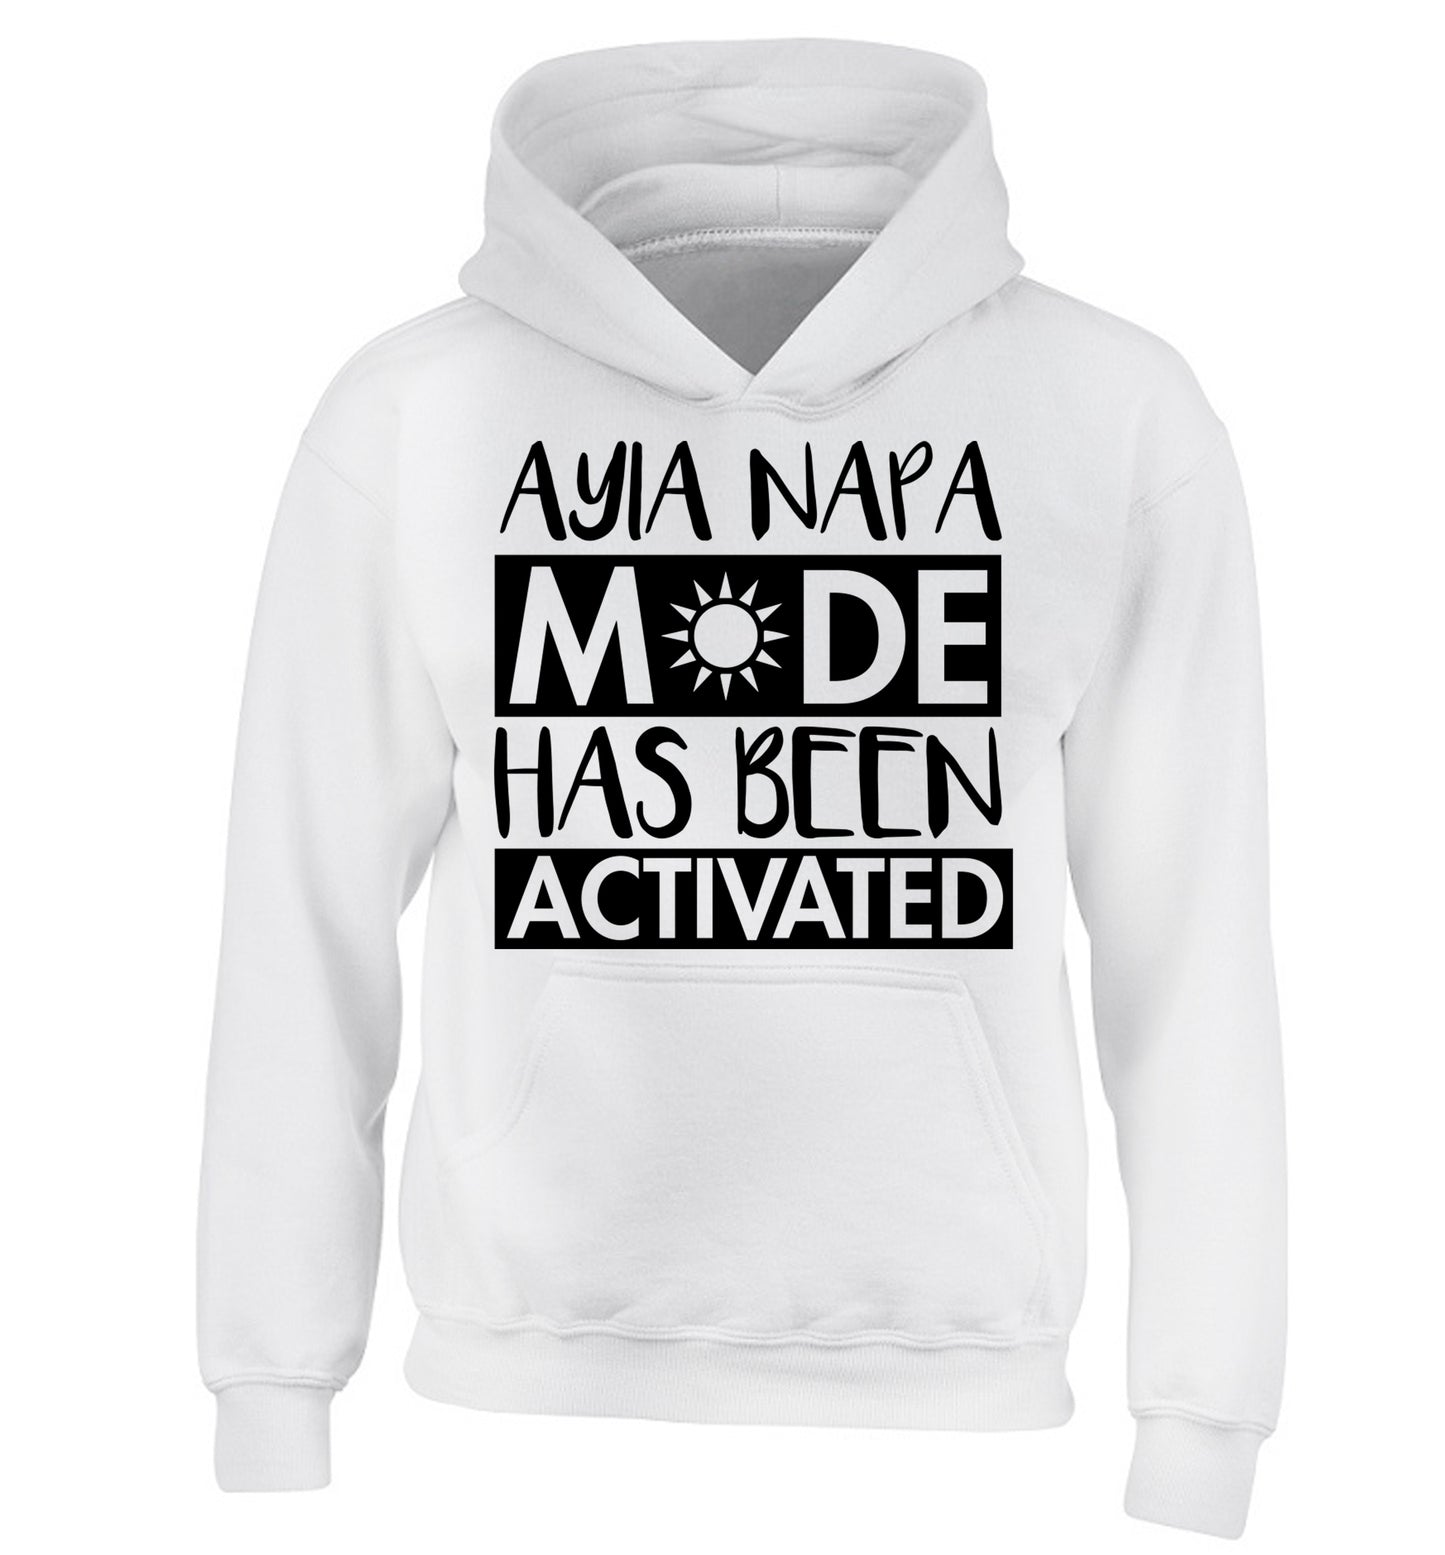 Ayia Napa mode has been activated children's white hoodie 12-13 Years